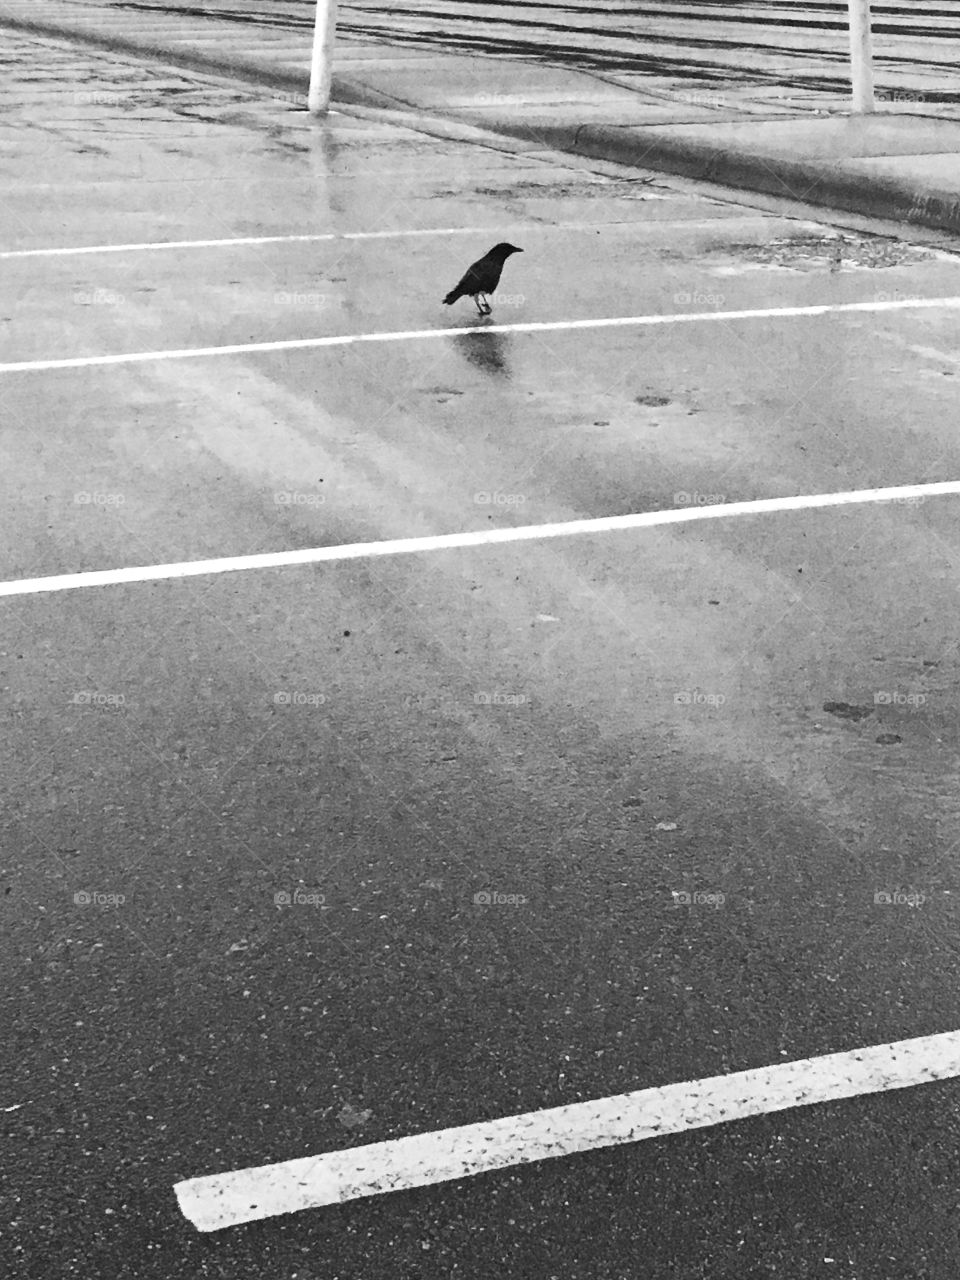 I think this looks better in black and white than color.  Lonely little crow after the rain.